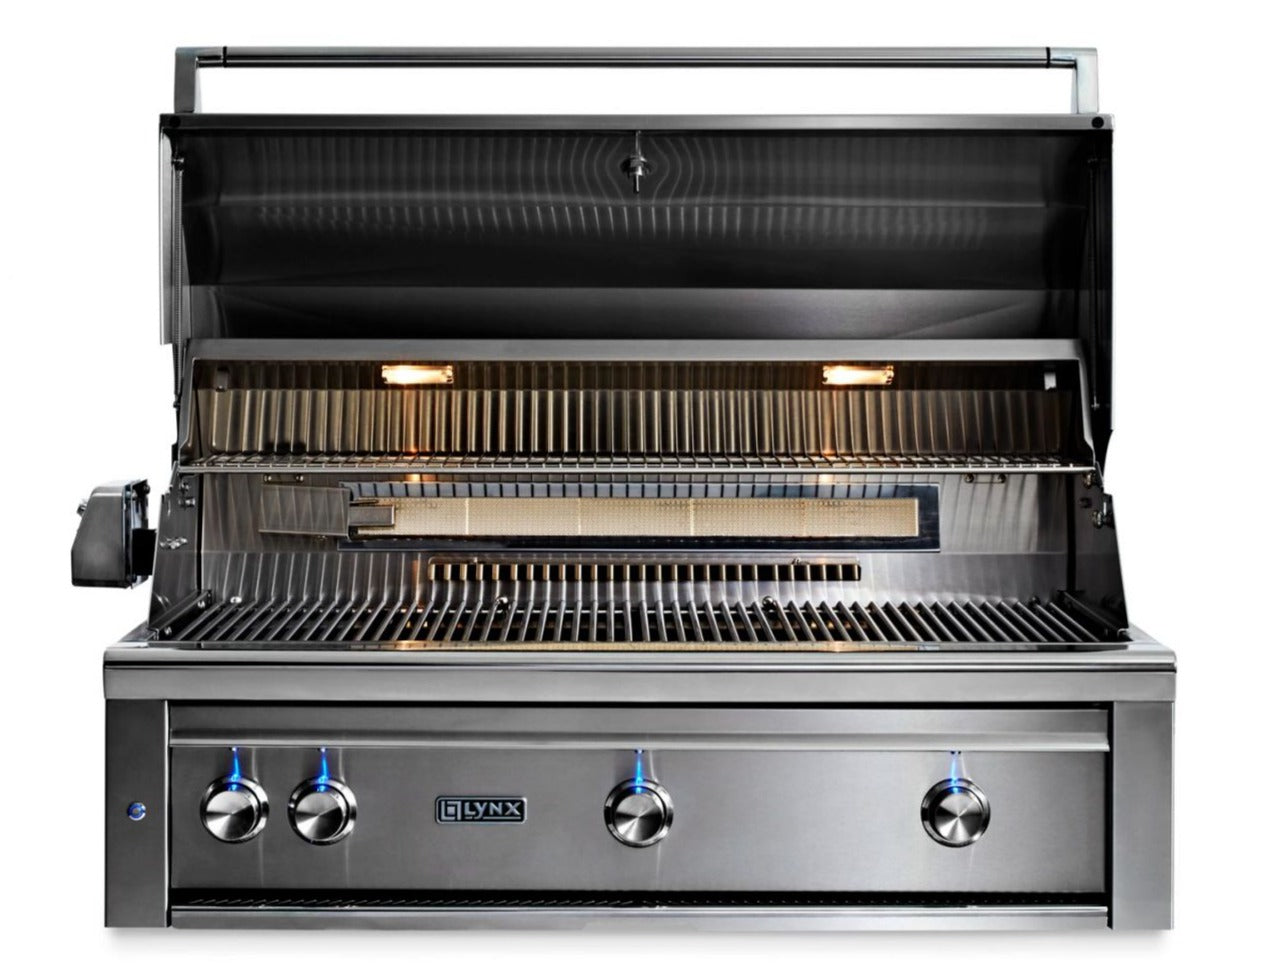 Lynx 42 Inch Professional Natural Gas Grill w/ Trident Burner and Rotisserie